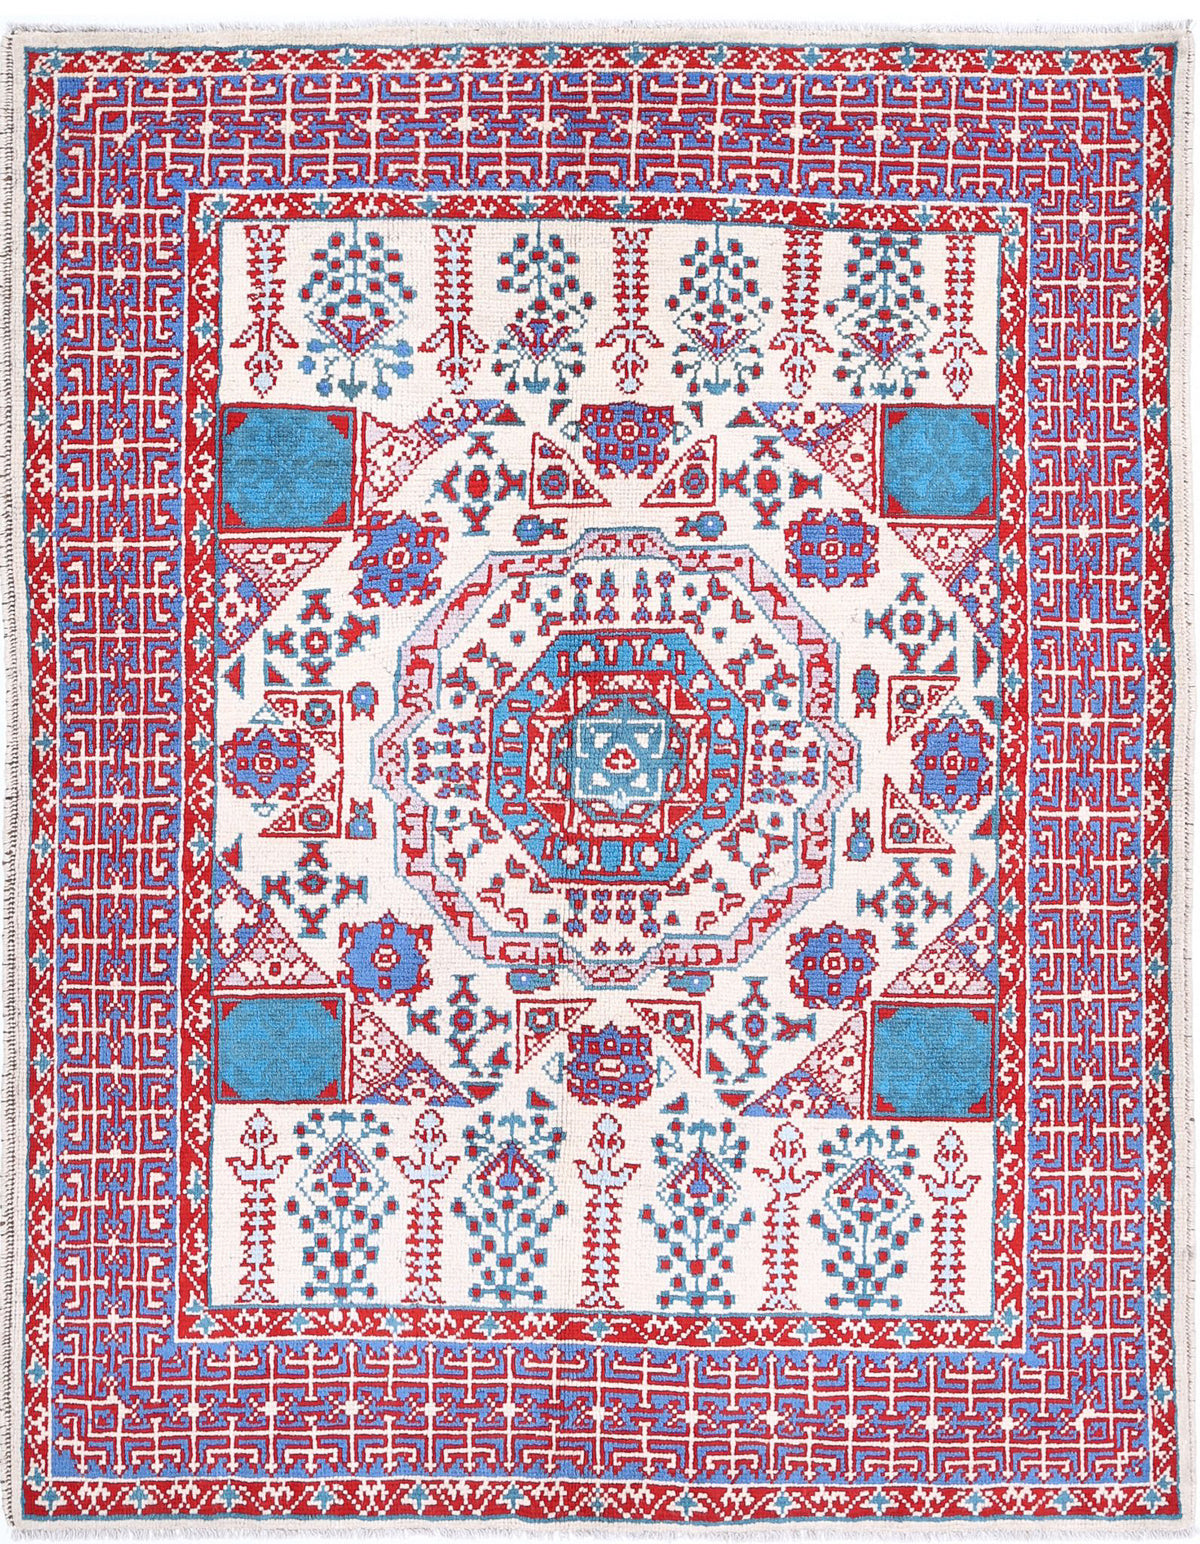 Revival-hand-knotted-qarghani-wool-rug-5014095.jpg